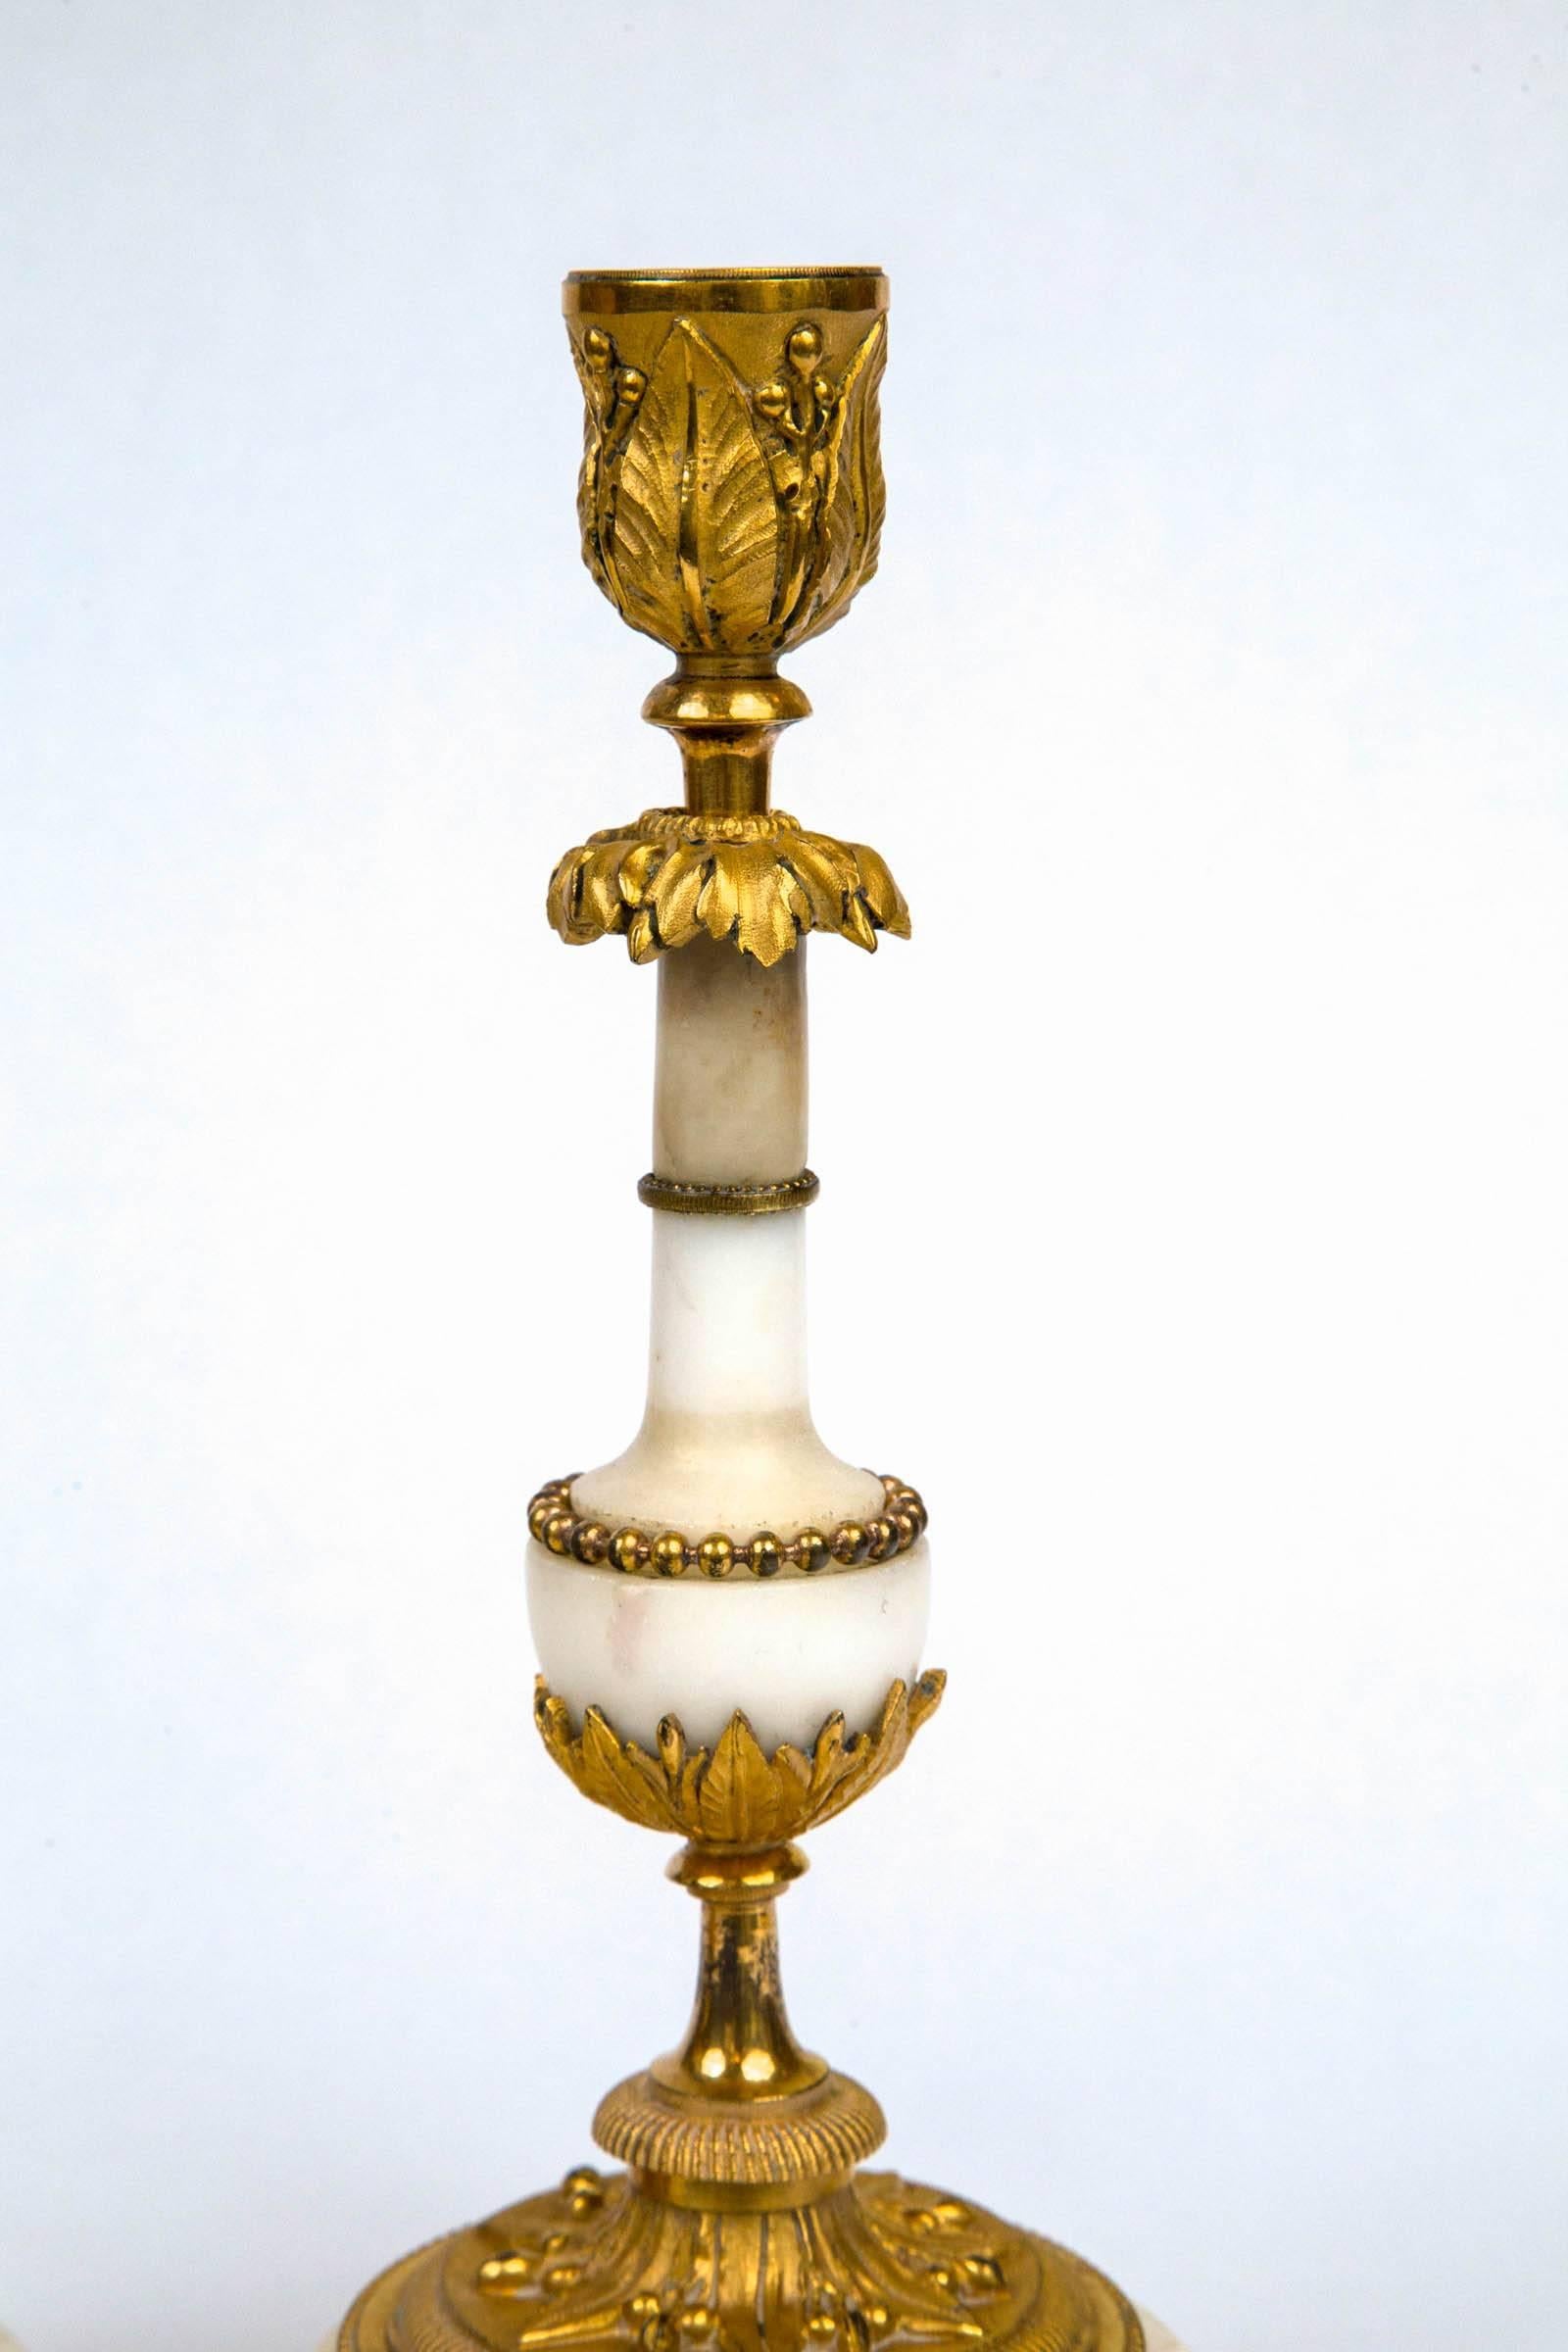 Fine white marble with fire gilt bronze mounts. Three ball feet and a brace underneath.
 